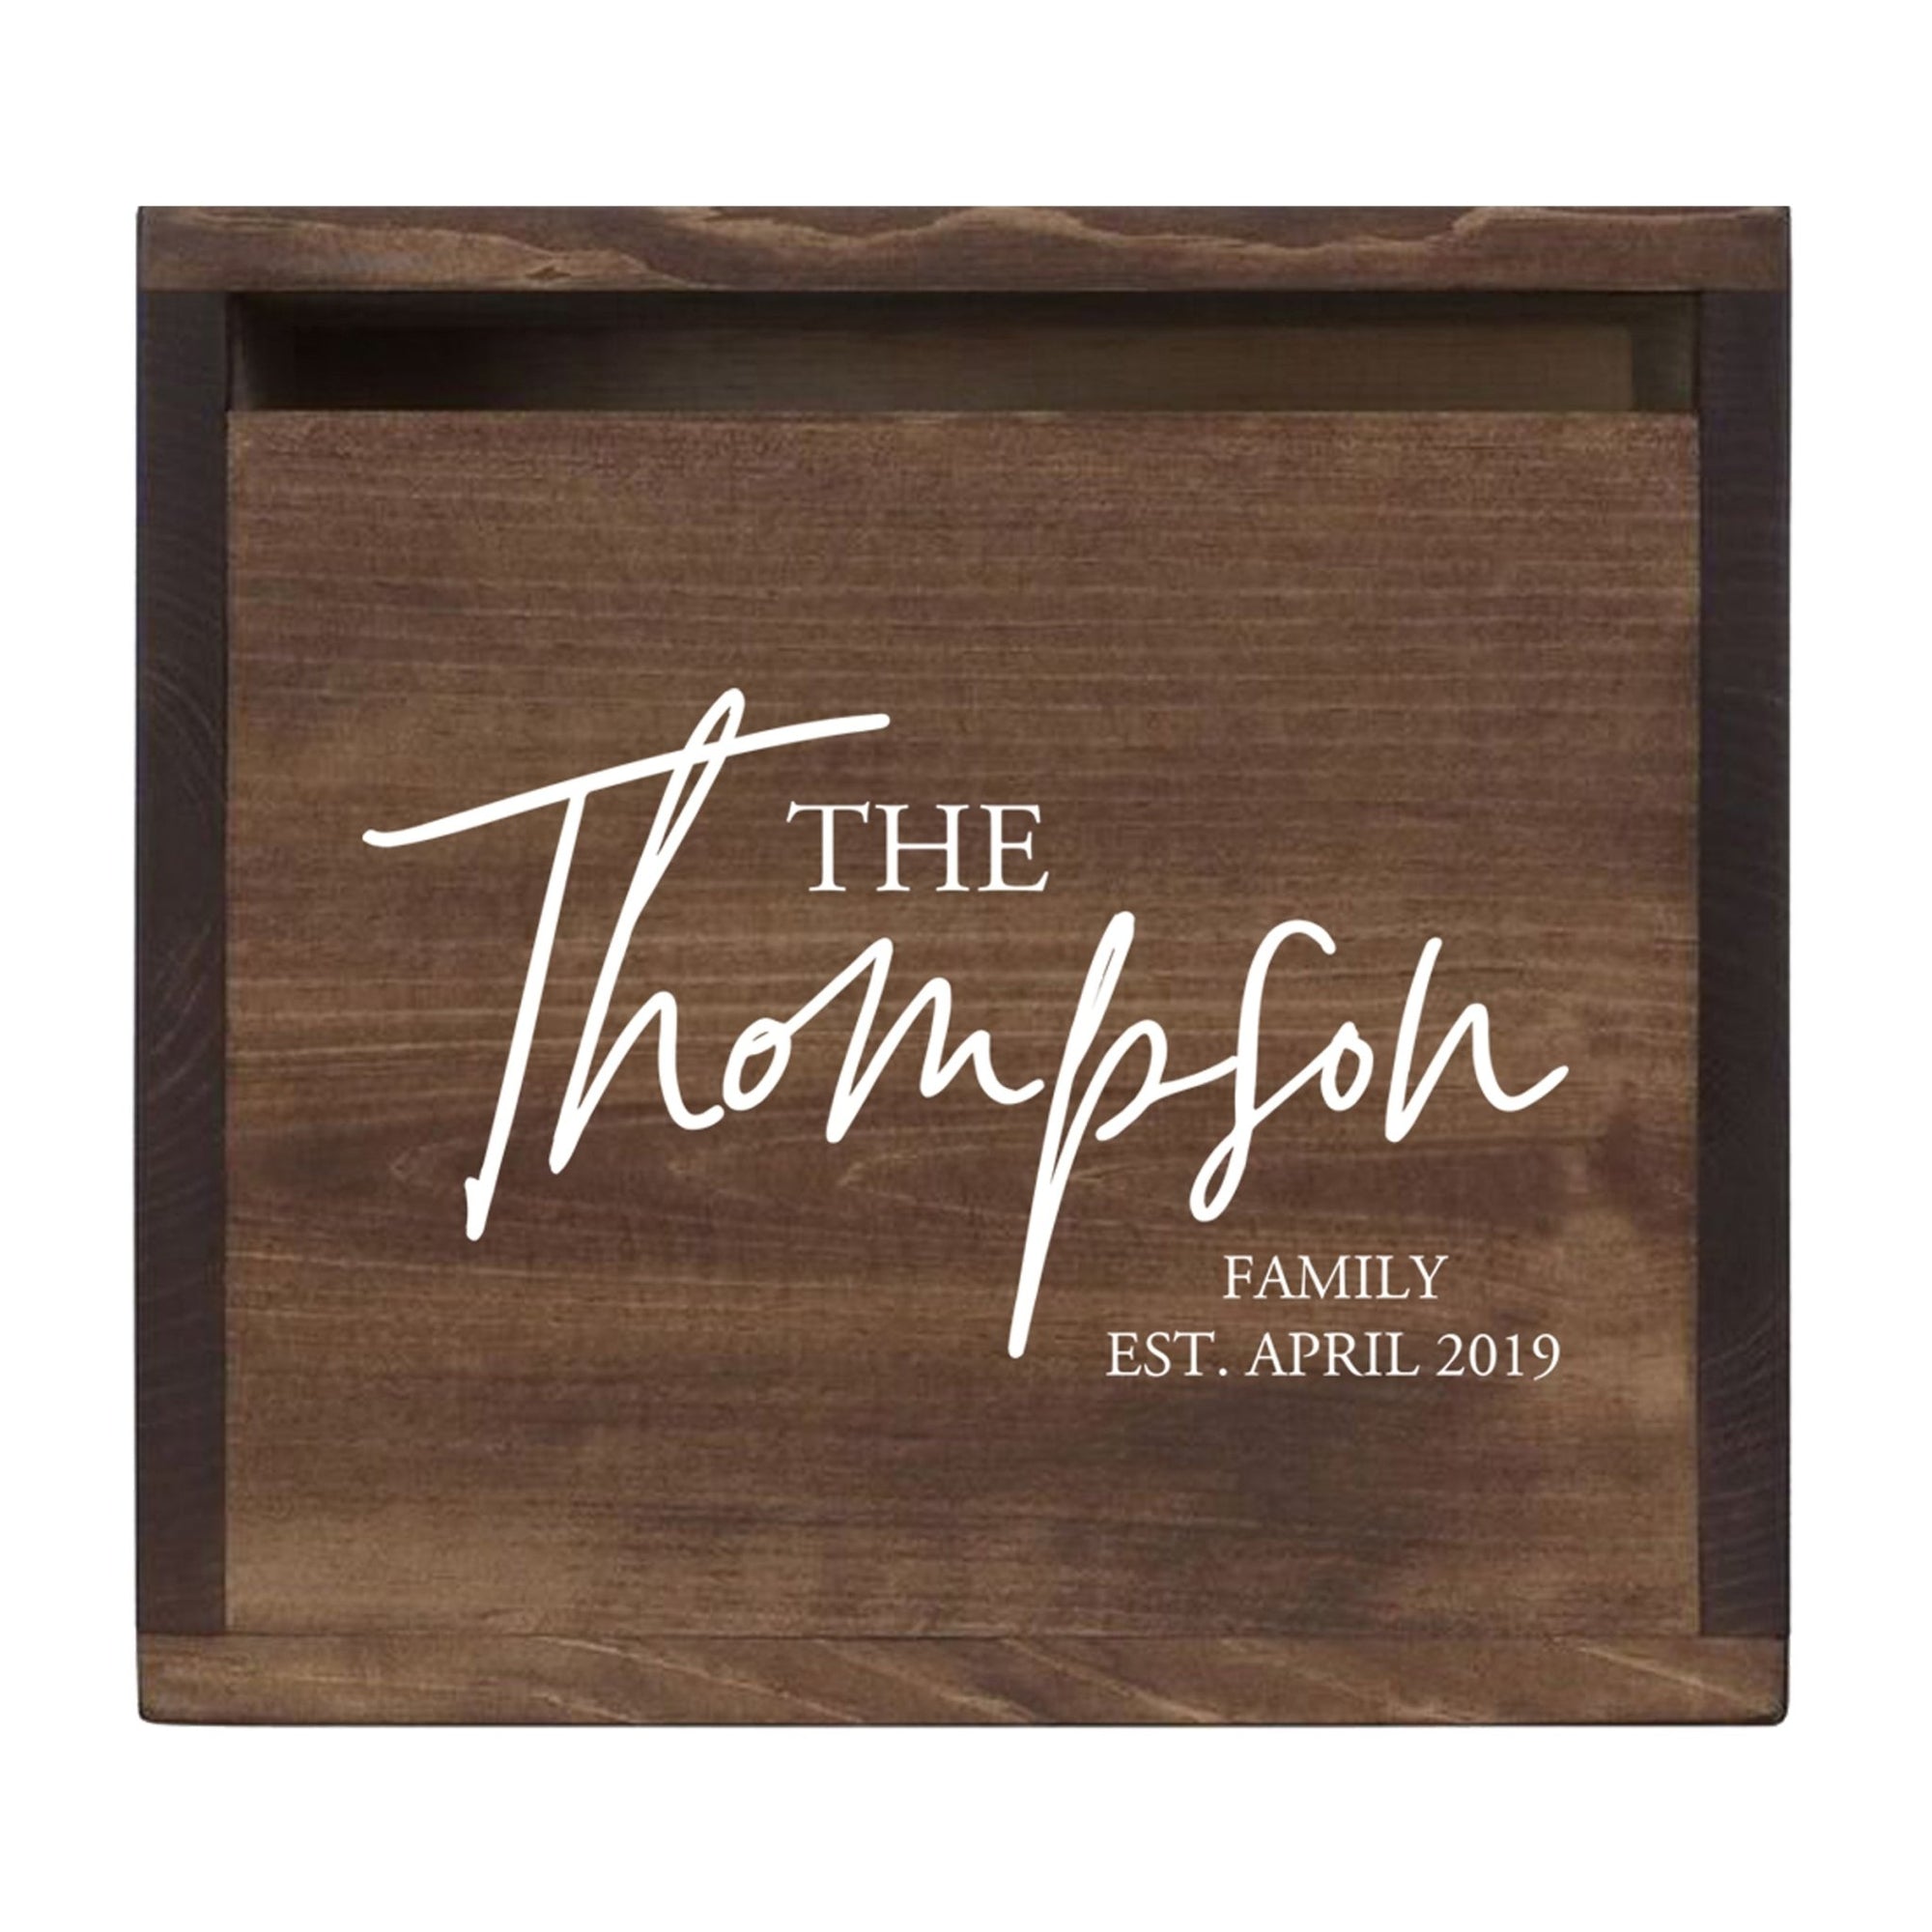 Personalized Wooden Card Box for Wedding Ceremonies, Venues, Receptions, Bridal Showers, and Engagement Parties 13.5x12 - The Thompson - LifeSong Milestones